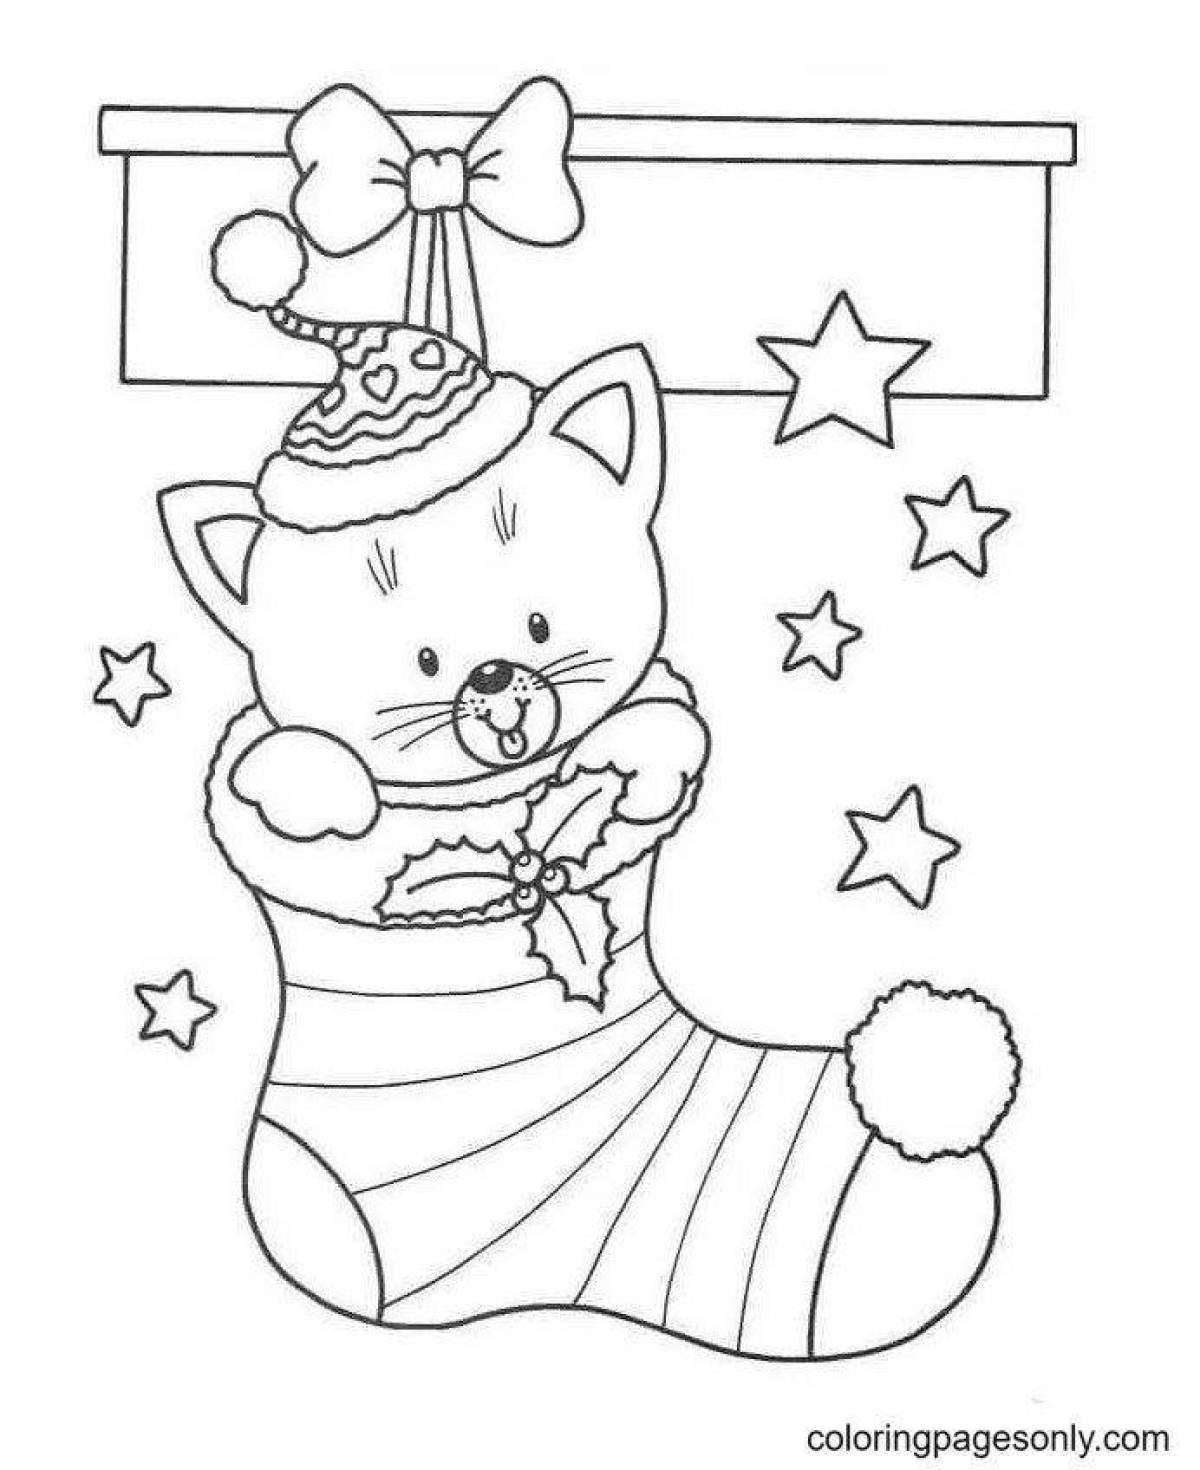 Fairytale kitty christmas coloring book